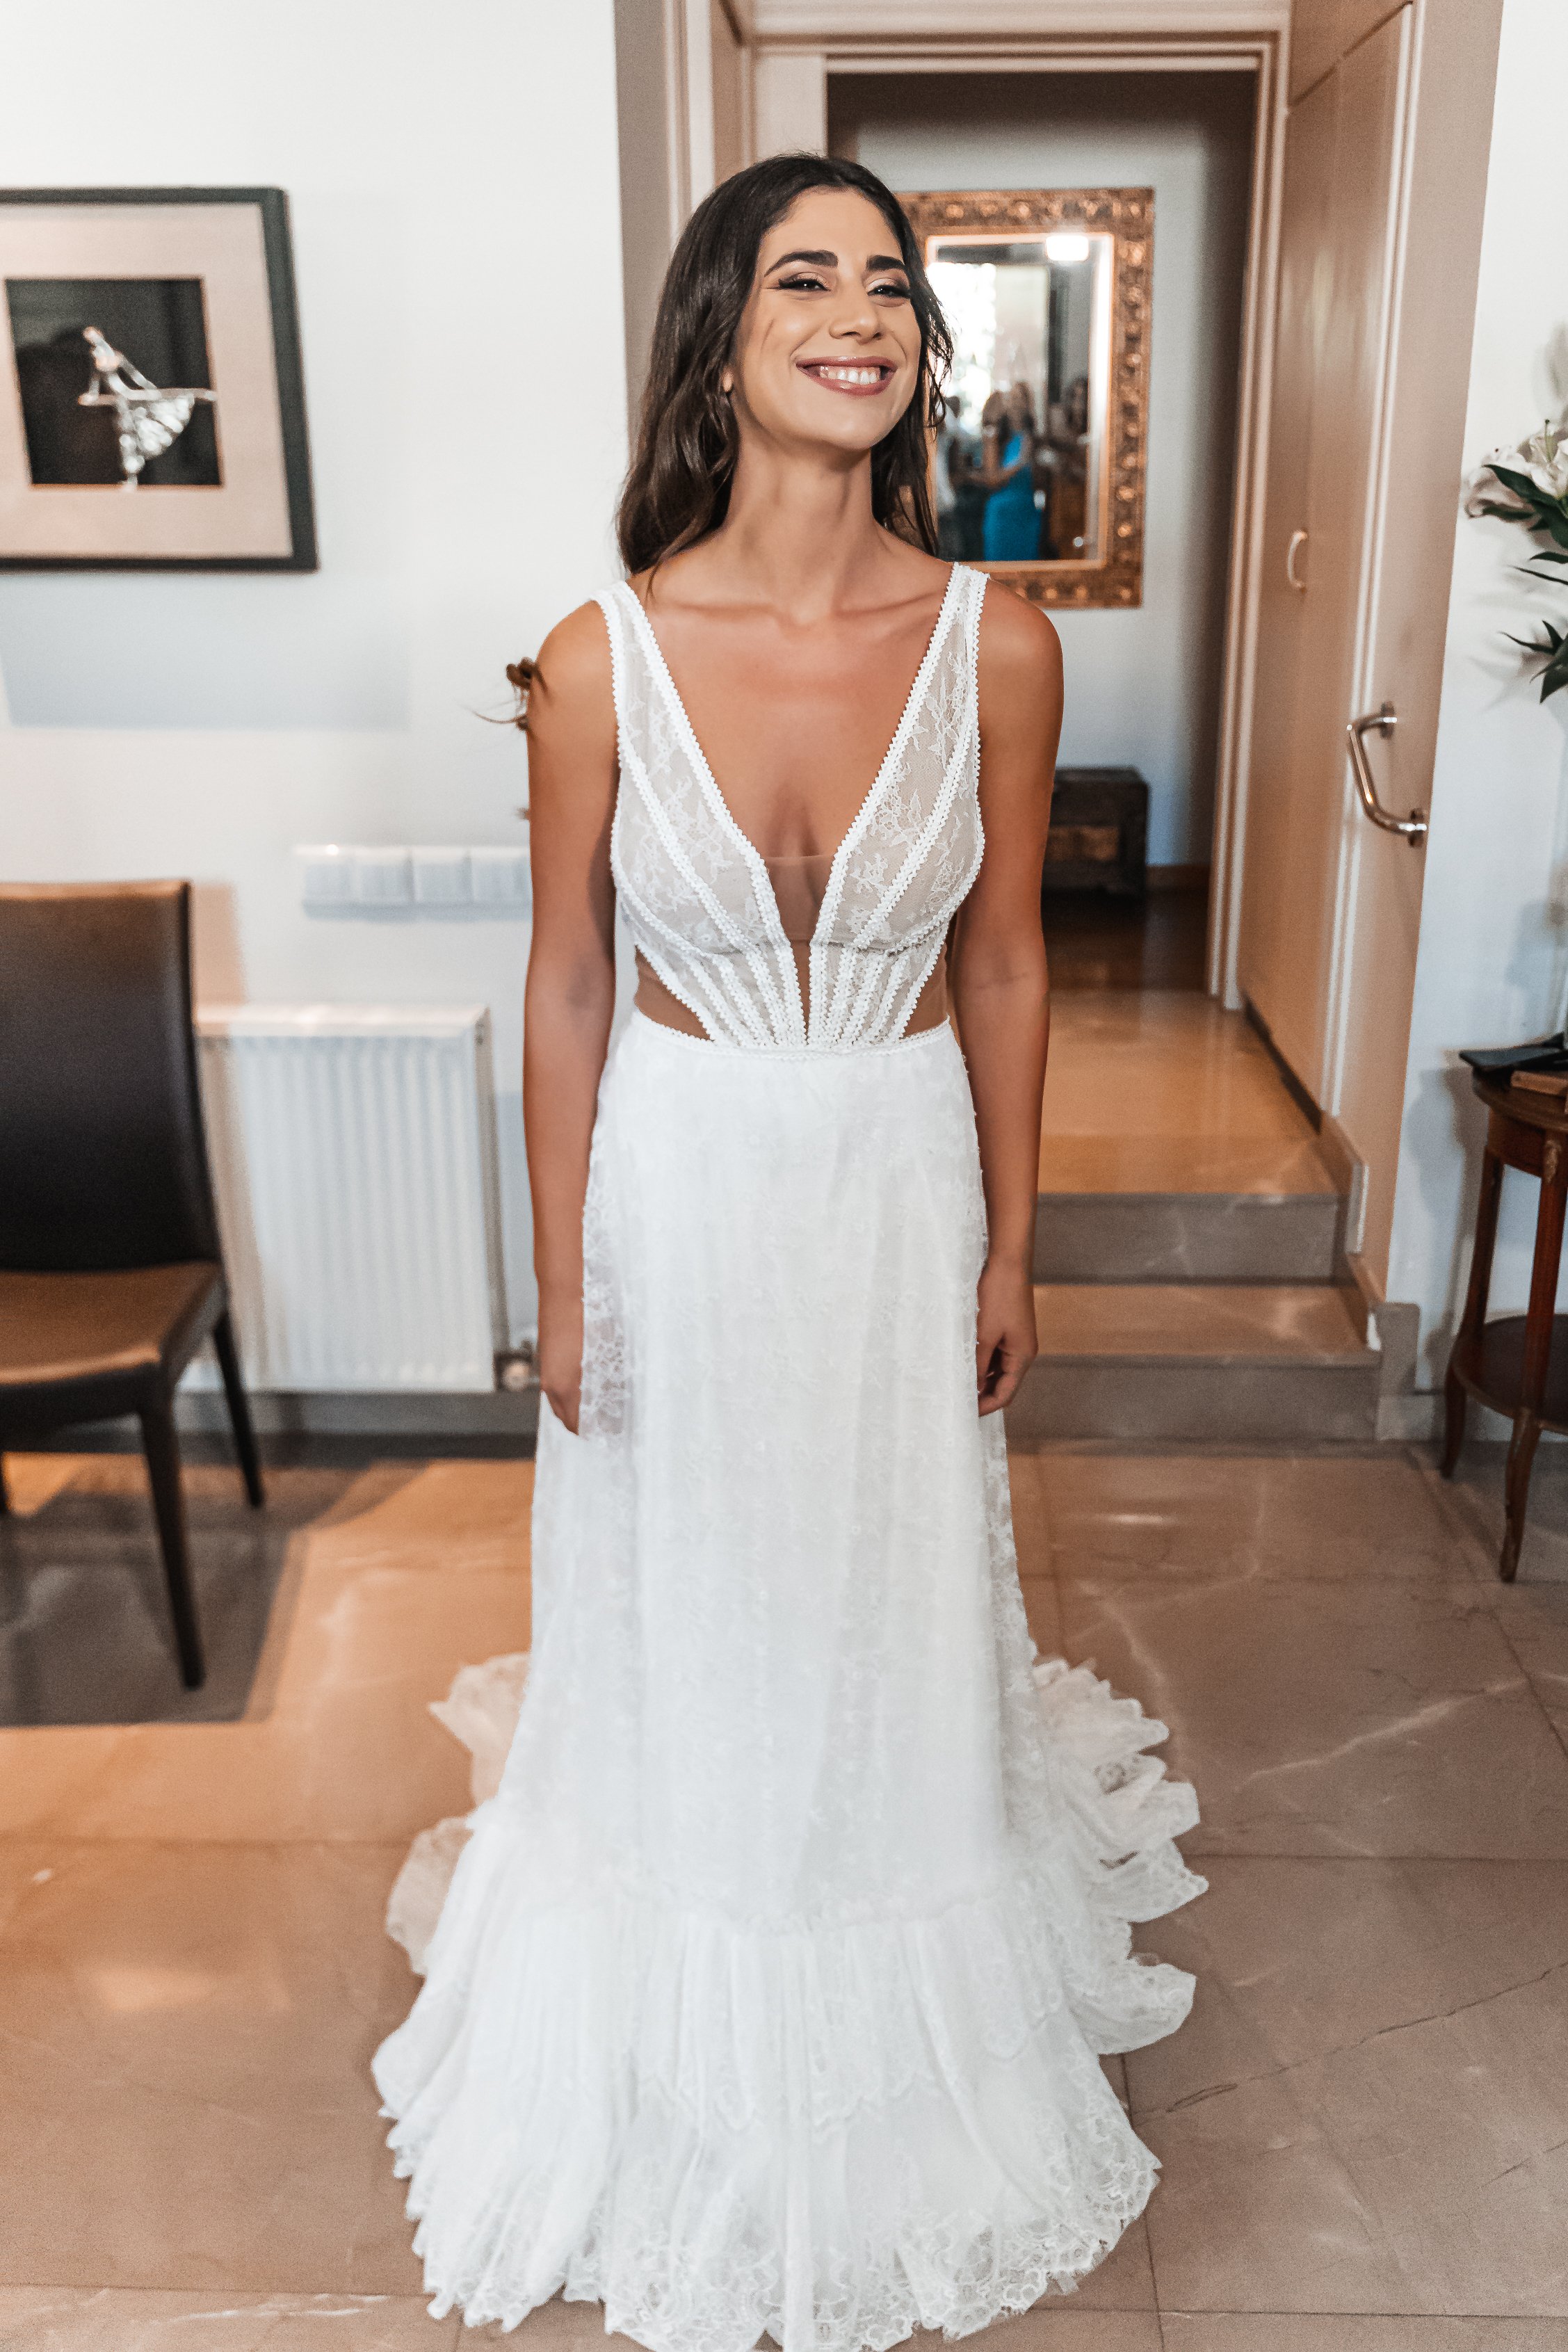 The reception was a night to remember, with laughter and love filling the air. Our photographer expertly captured the joy and celebration with wedding photography in Cyprus that the couple will cheris